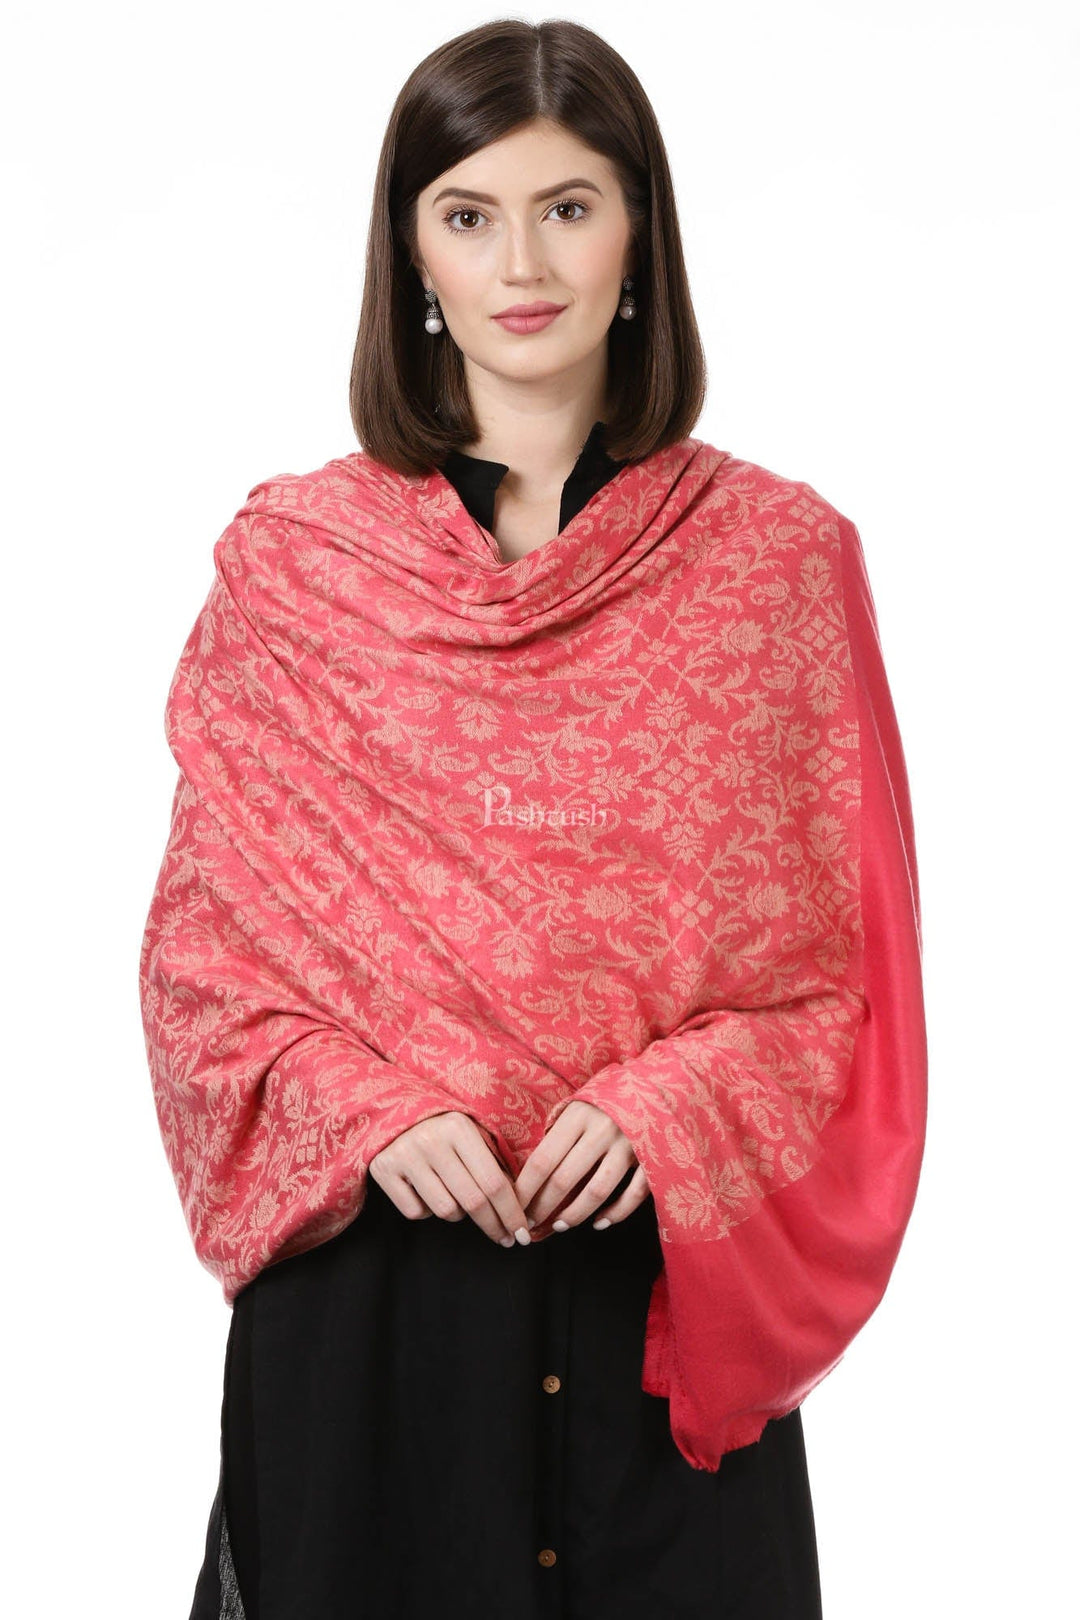 Pashtush India Womens Stoles and Scarves Scarf Pashtush Women'S Soft Bamboo Shawl, Thick And Warm